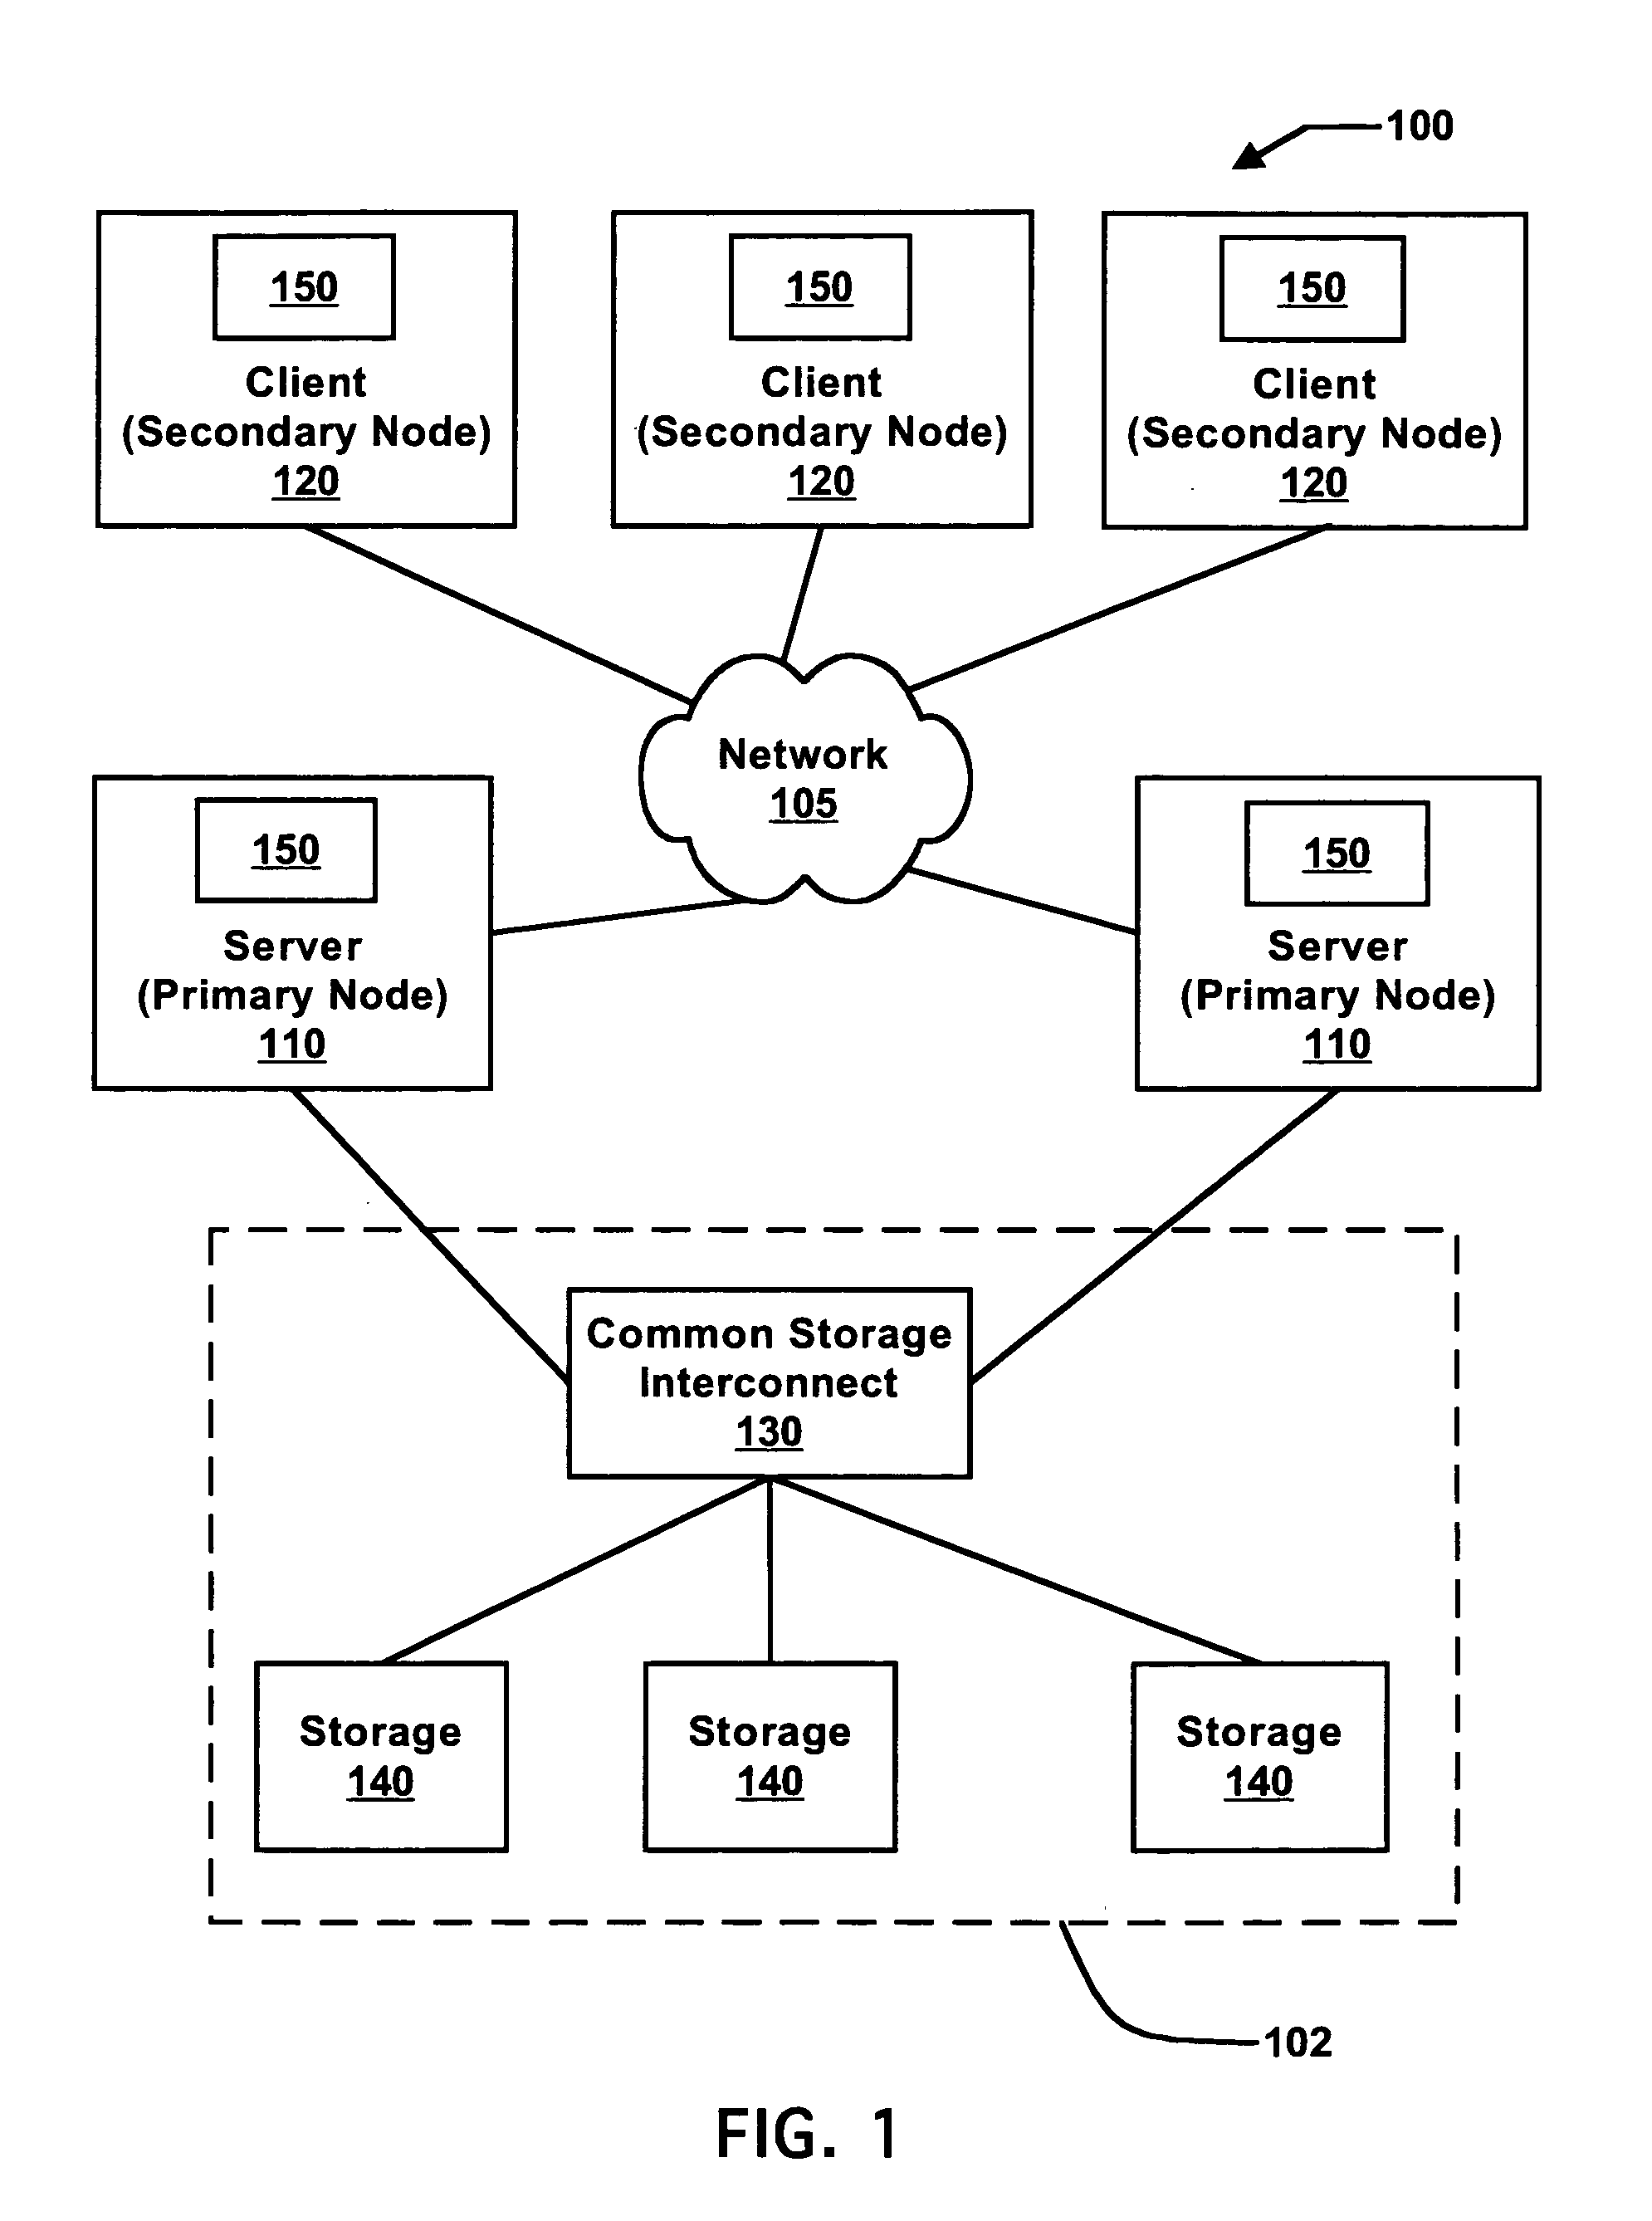 File system and methods for performing file create and open operations with efficient storage allocation